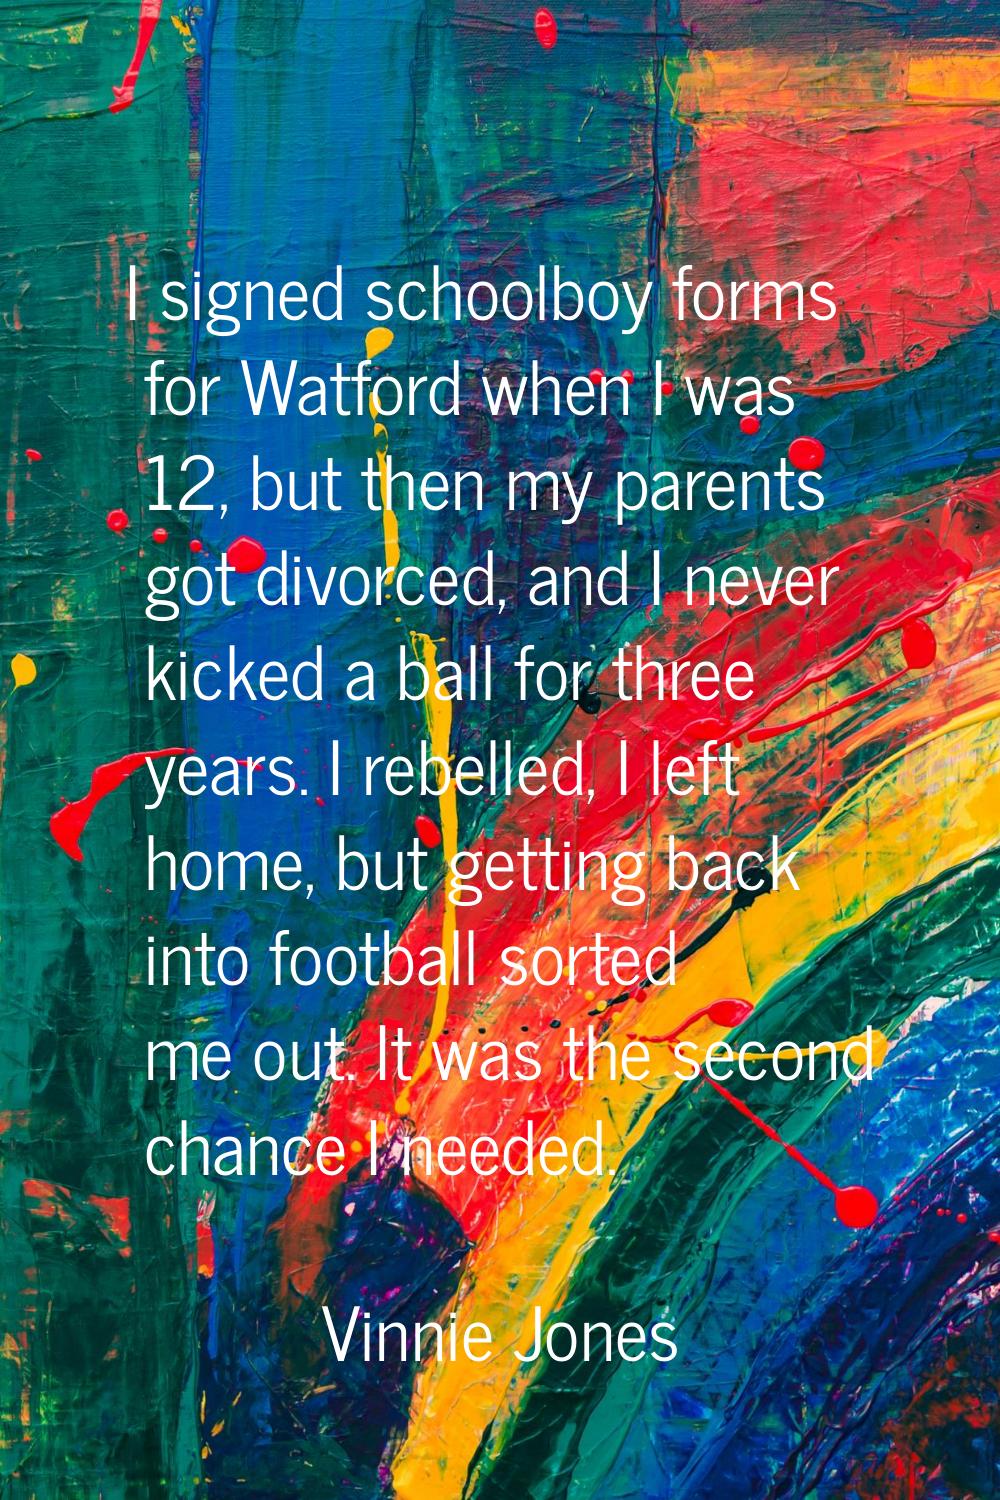 I signed schoolboy forms for Watford when I was 12, but then my parents got divorced, and I never k